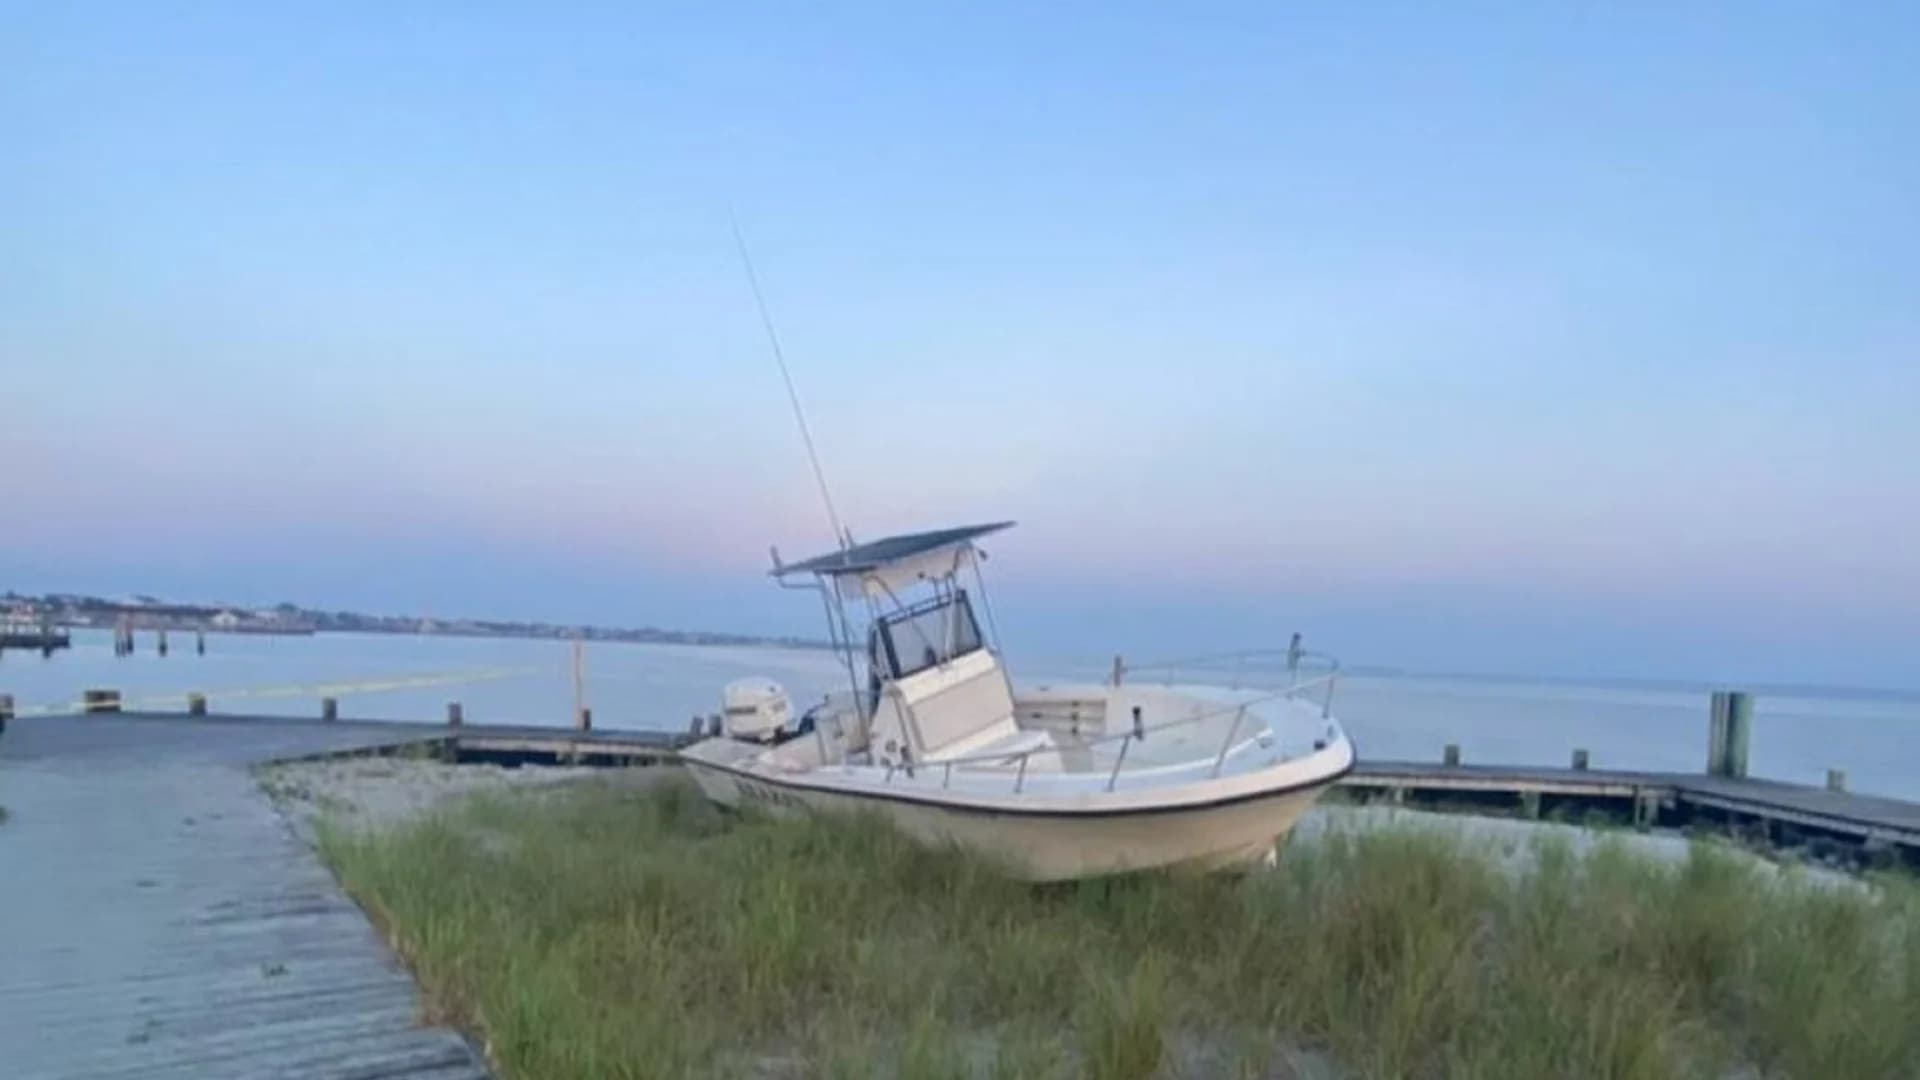 Police: Man crashed boat into Fire Island dock; charged with BWI